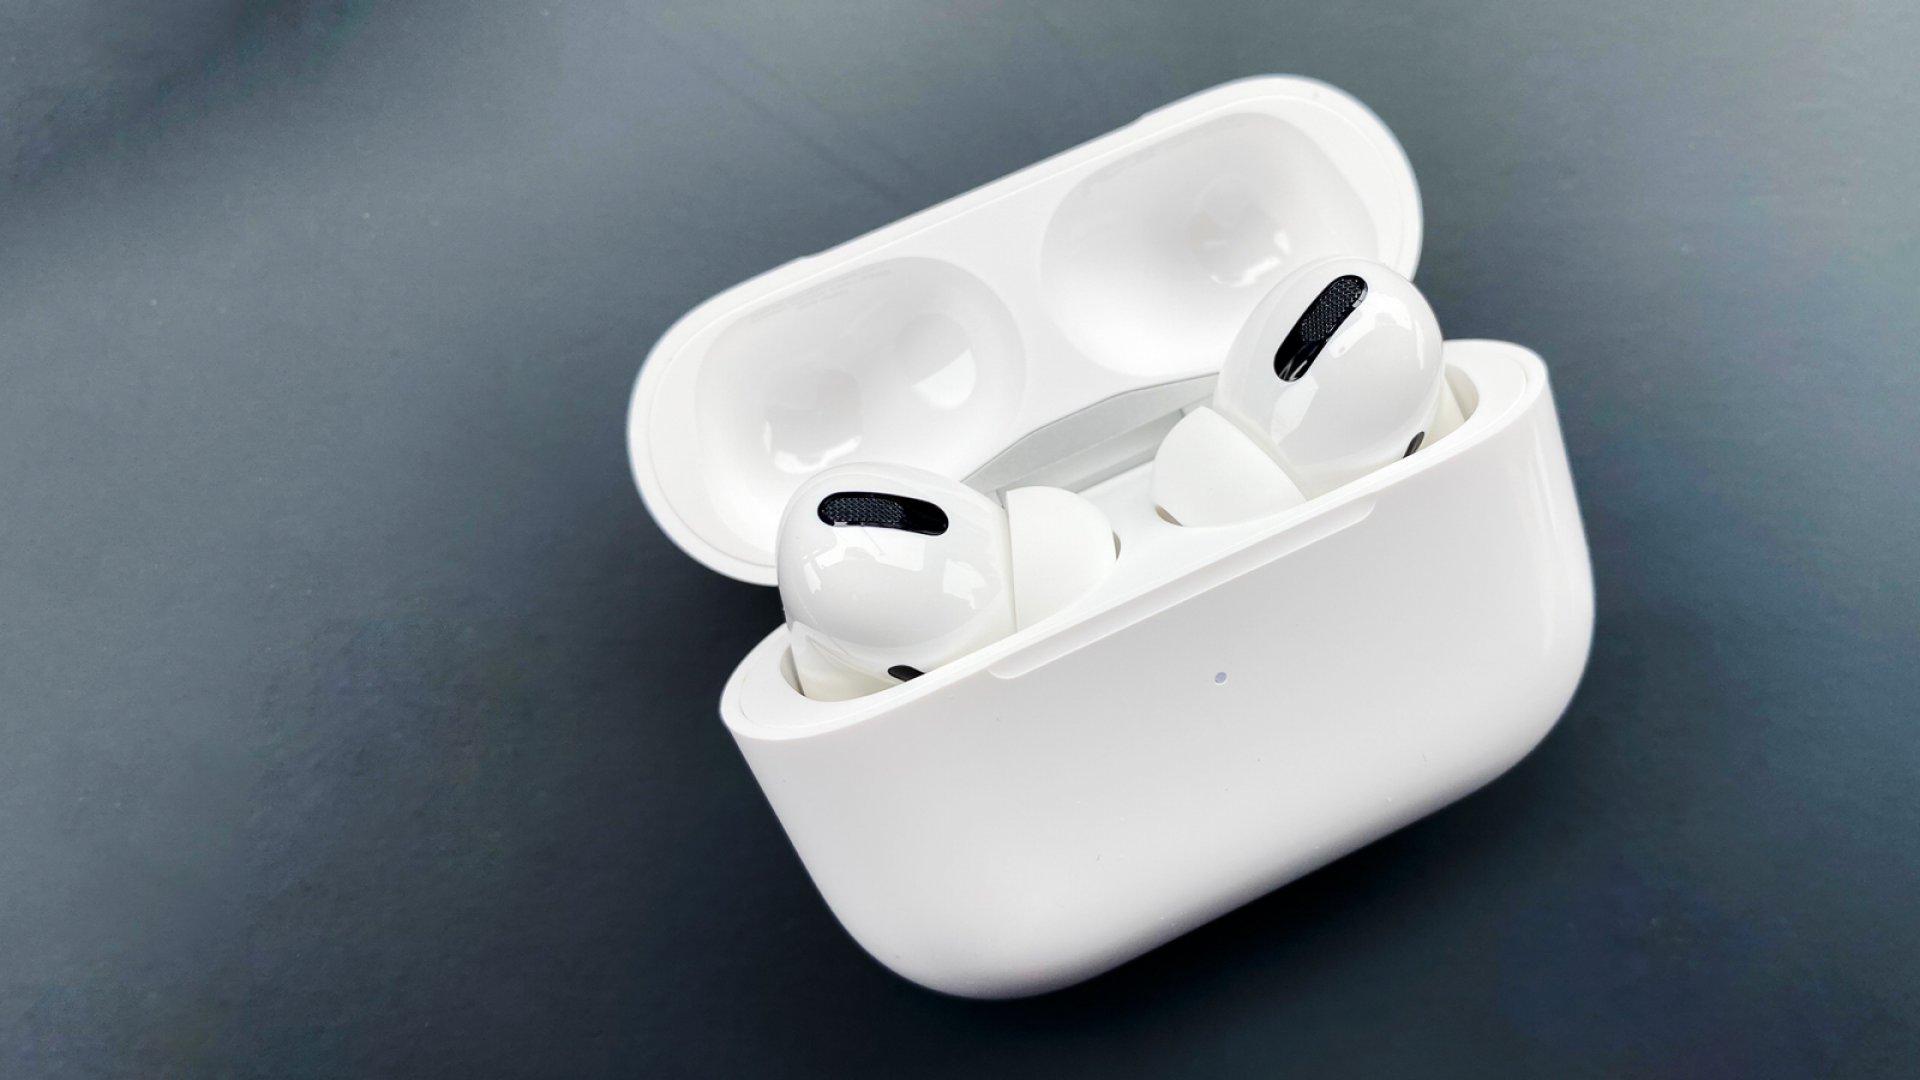 Airpods lighting. Air pods Pro 2. Apple AIRPODS 2. Apple AIRPODS Pro Pro 2. AIRPODS Pro 2 2022.